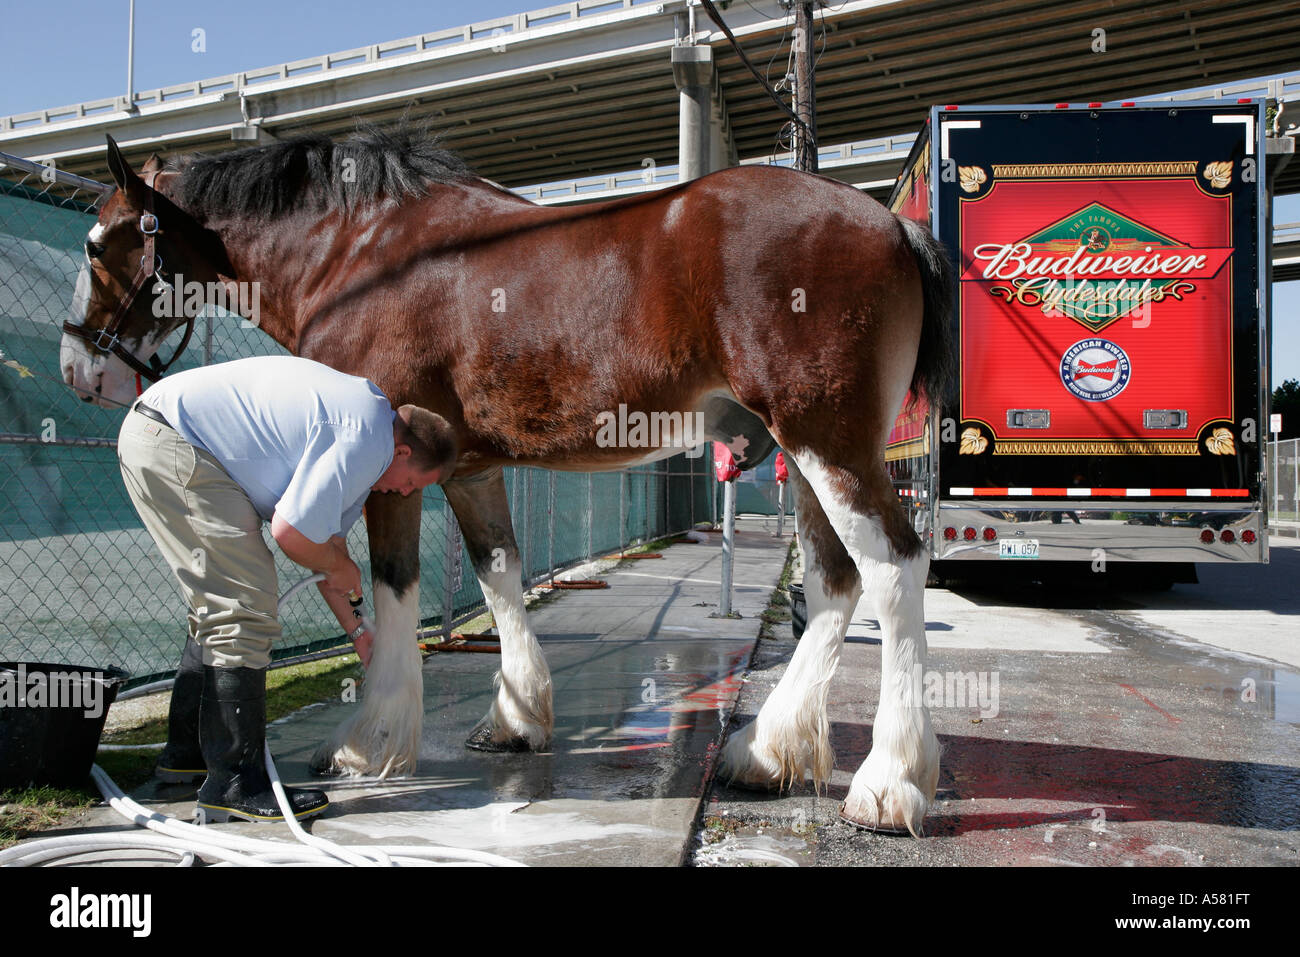 Miami Florida,Little Havana,Jose Marti Park,Budweiser Clydesdales,image,corporate marketing,public relations,show horses,man men male,groomer,washes f Stock Photo